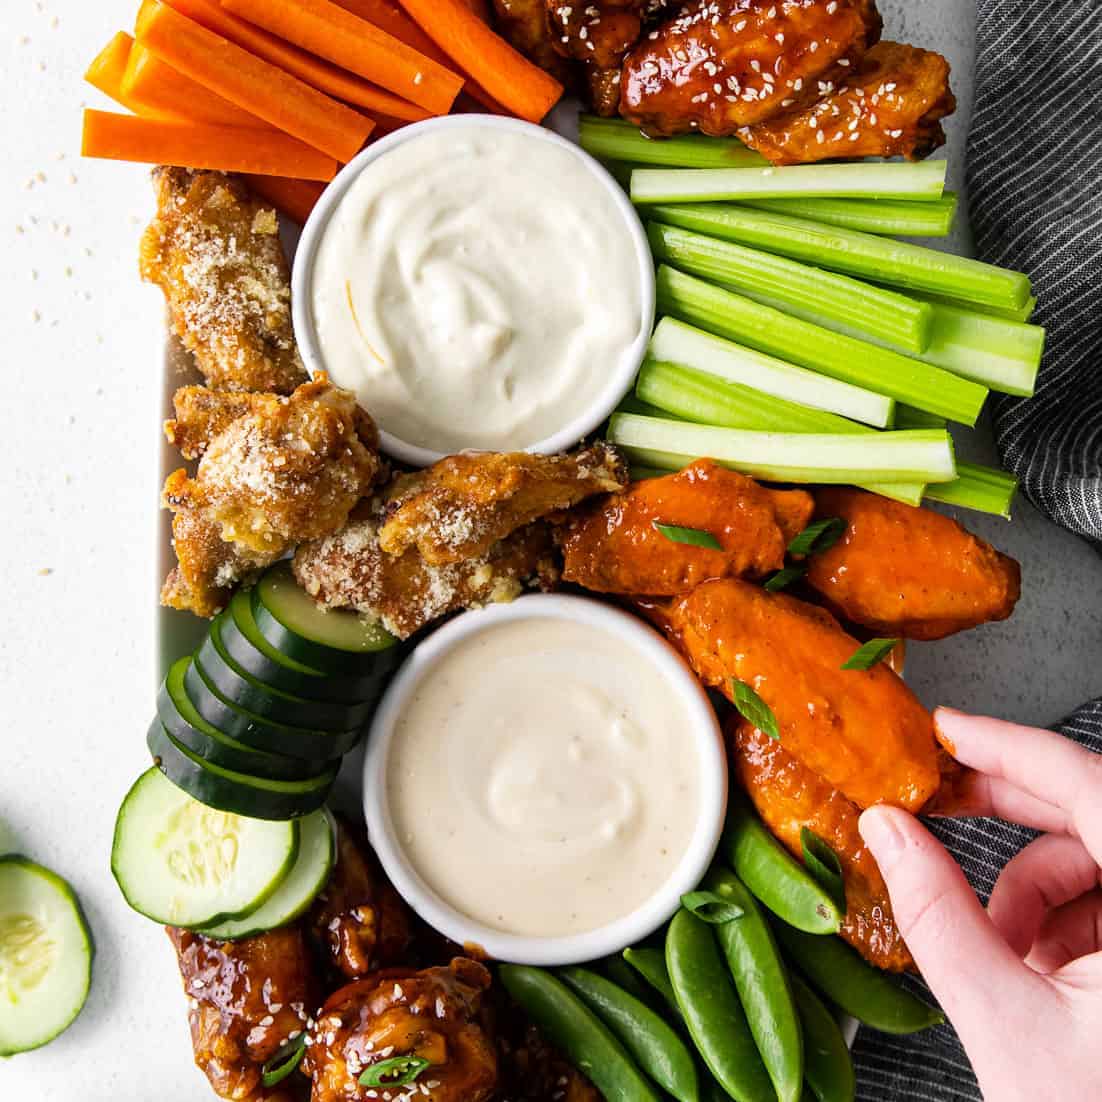 https://fitfoodiefinds.com/wp-content/uploads/2022/01/Air-Fryer-Chicken-Wings-16sq.jpg